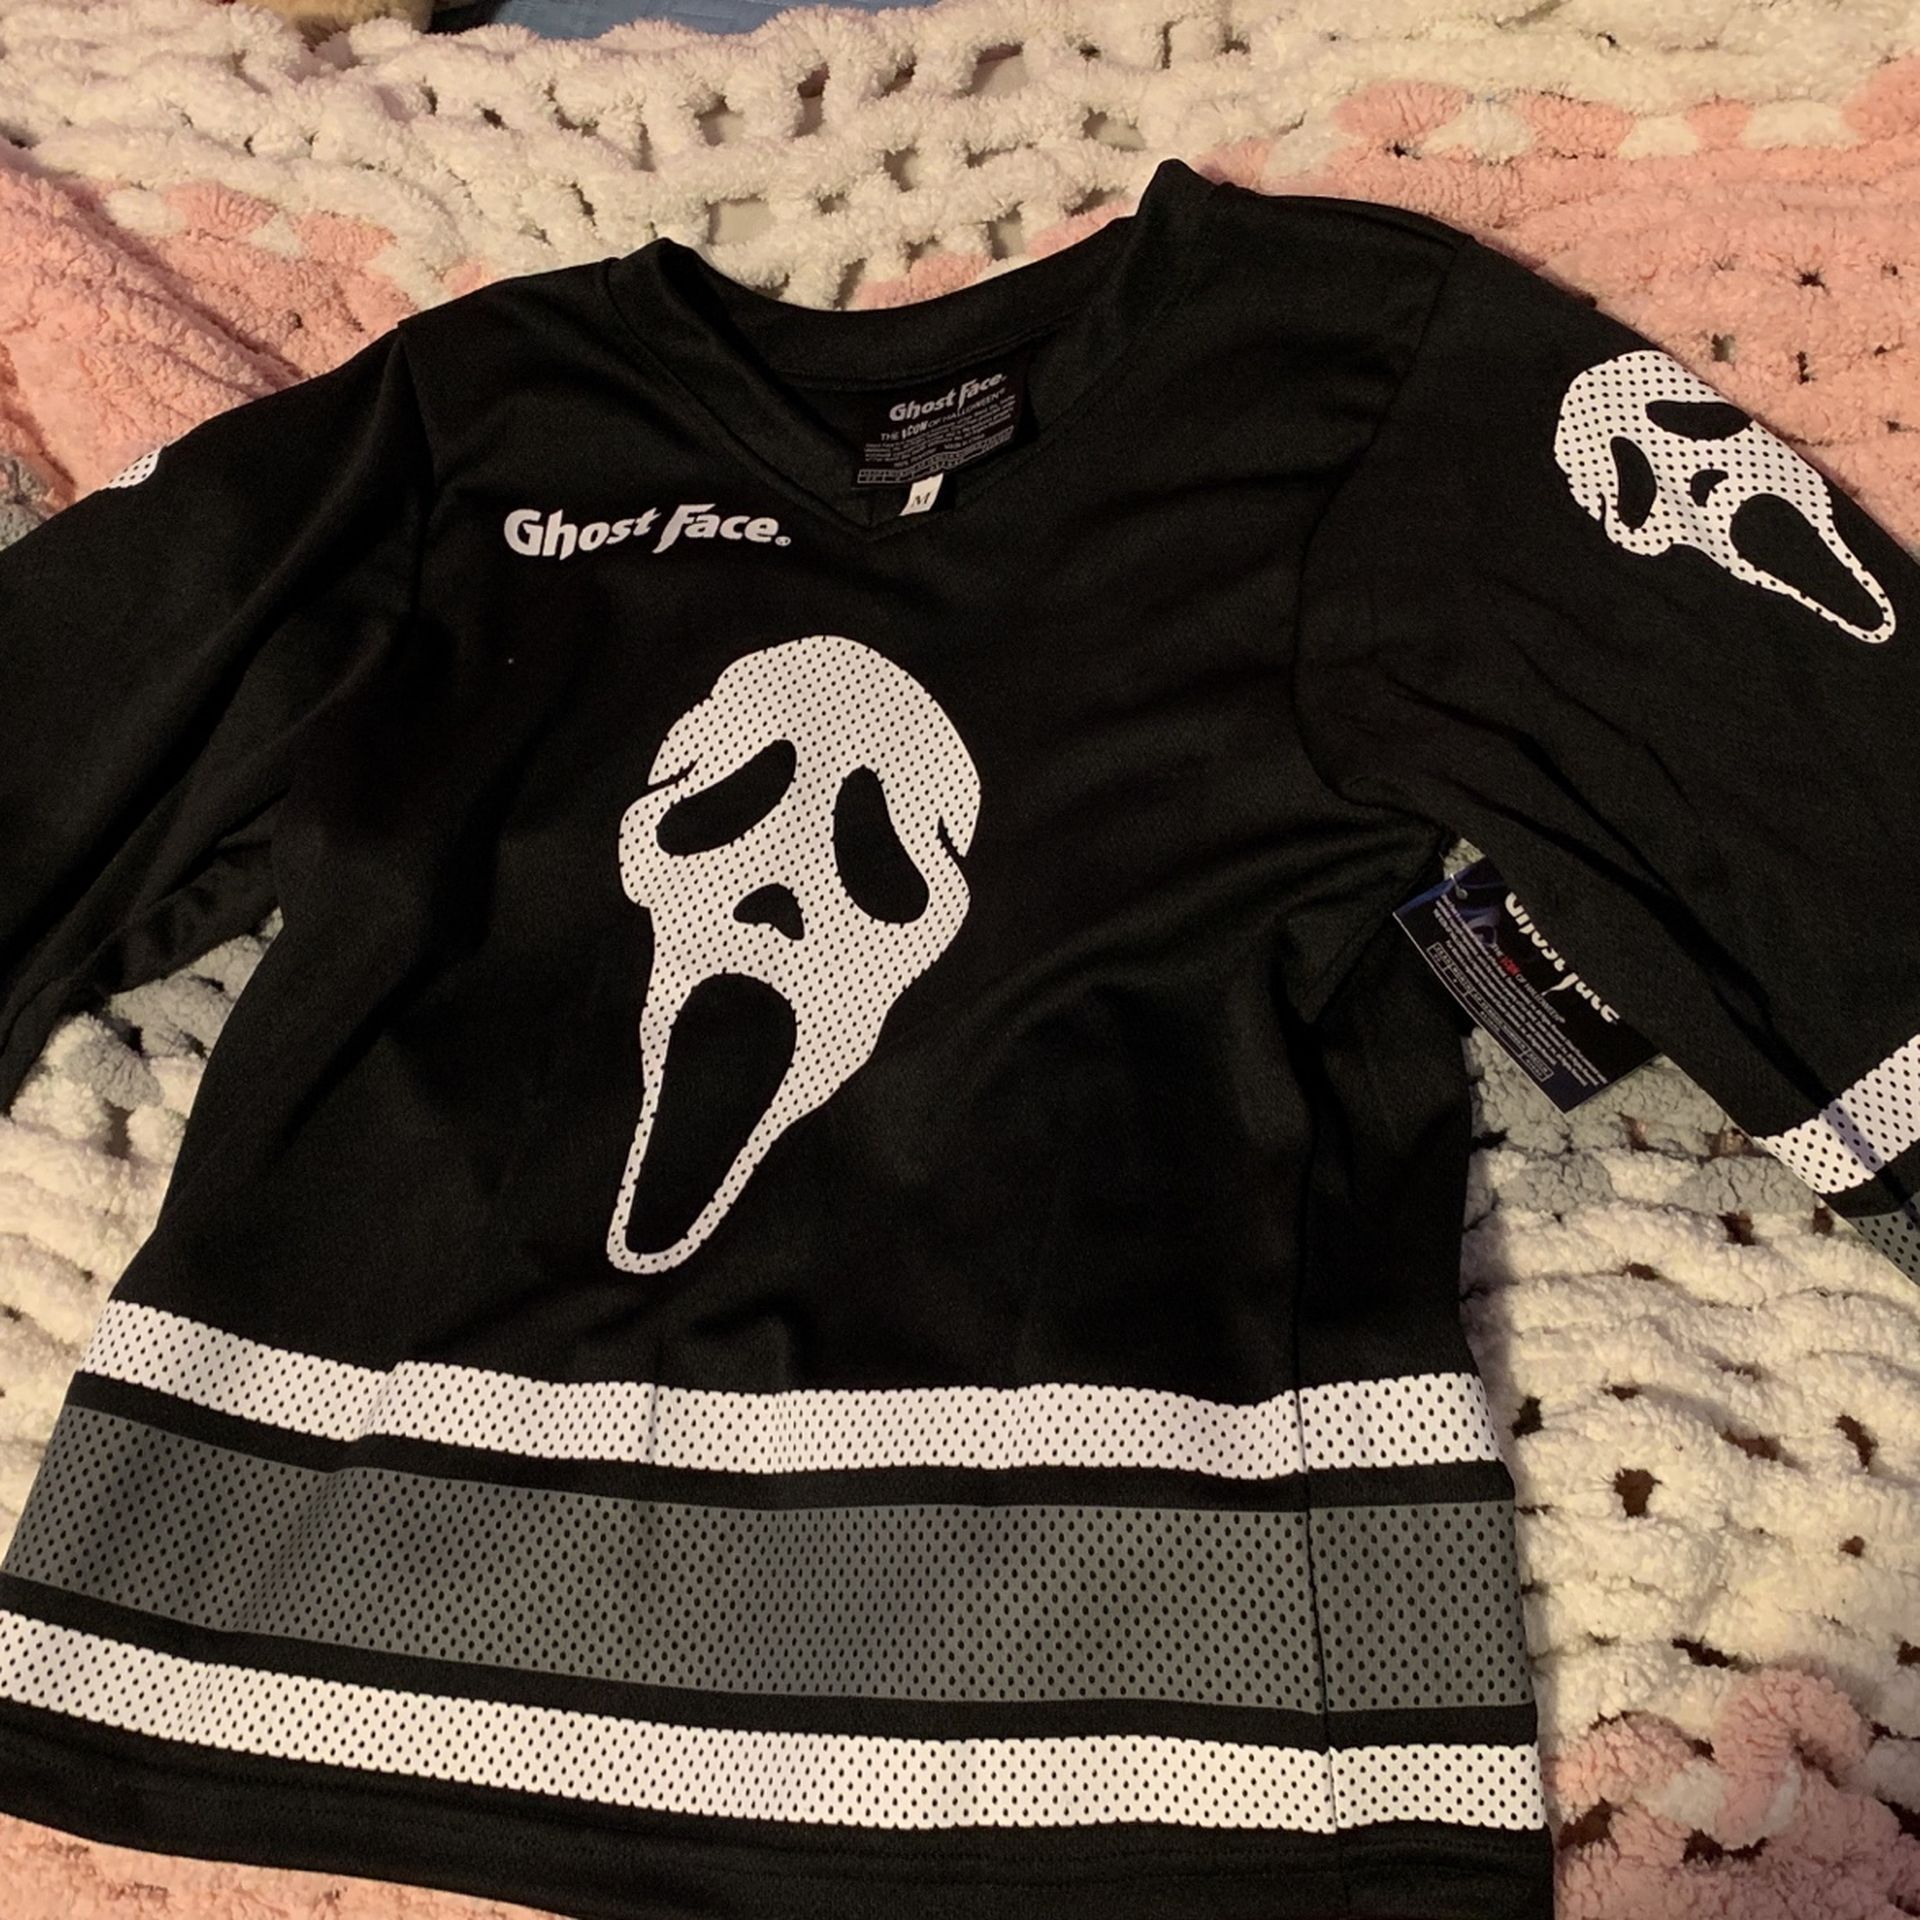 Ghost Face Jersey Halloween Costume